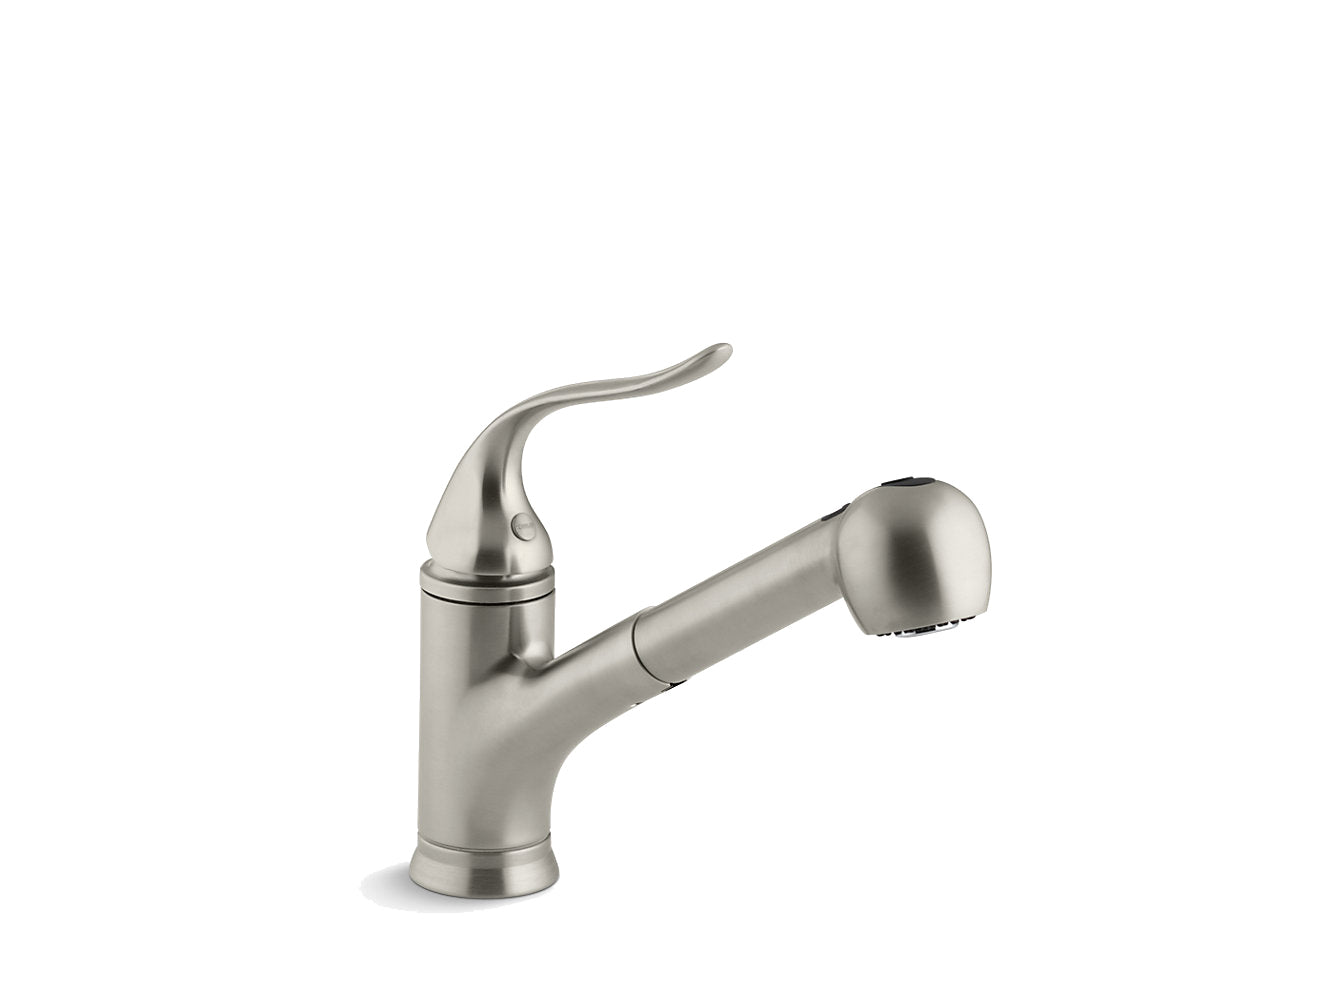 Kohler Coralais Single Hole or Three Hole Kitchen Sink Faucet With Pull Out Matching Color Sprayhead, 9" Spout Reach and Lever Handle- Vibrant Brushed Nickel